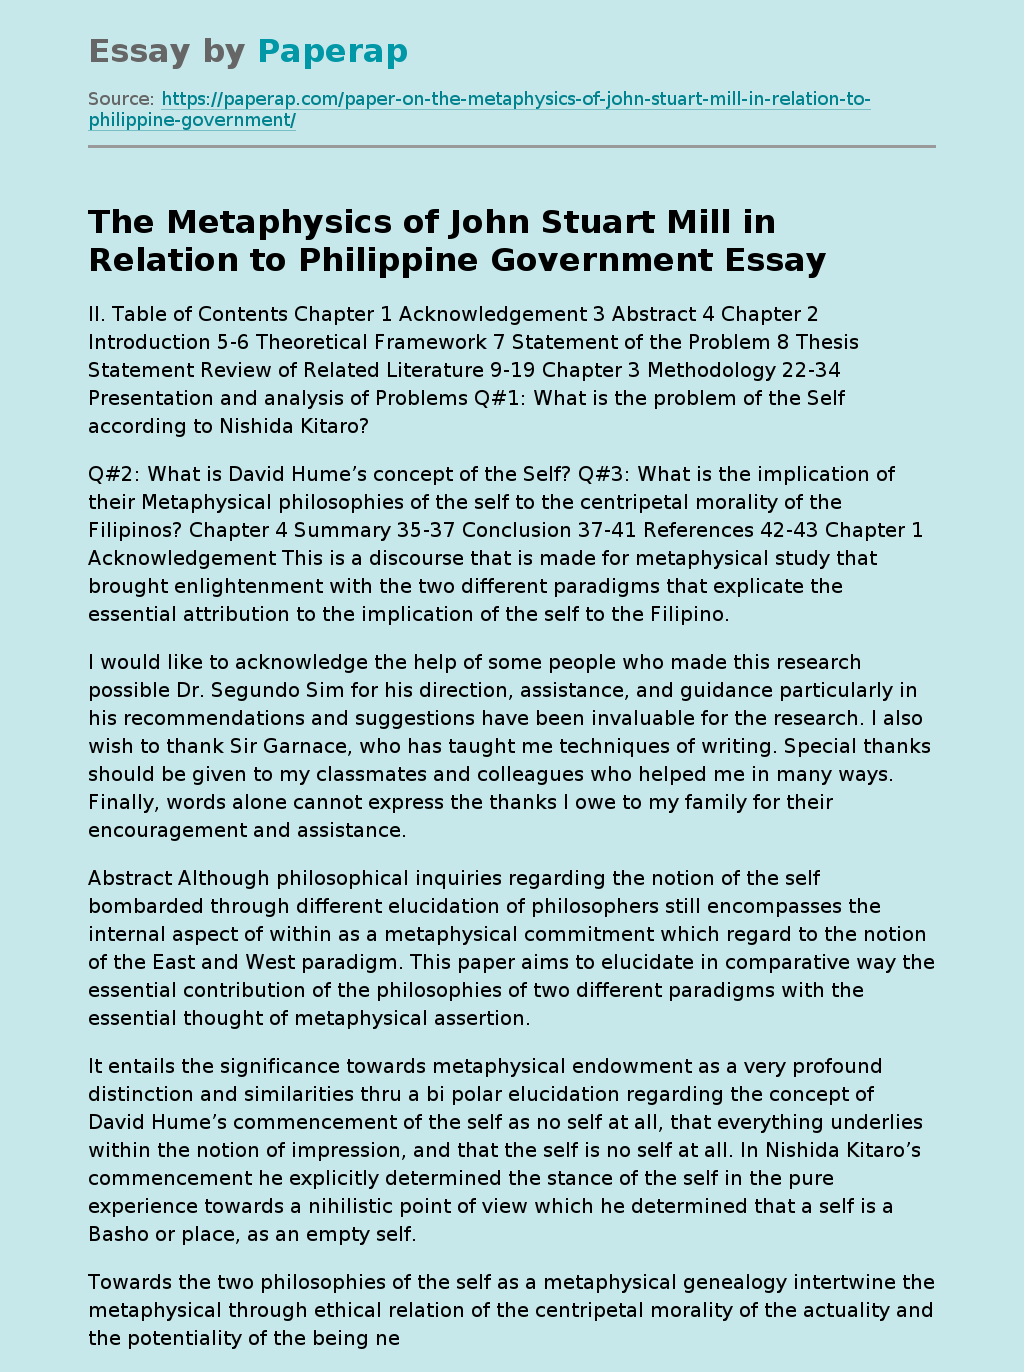 The Metaphysics of John Stuart Mill in Relation to Philippine Government